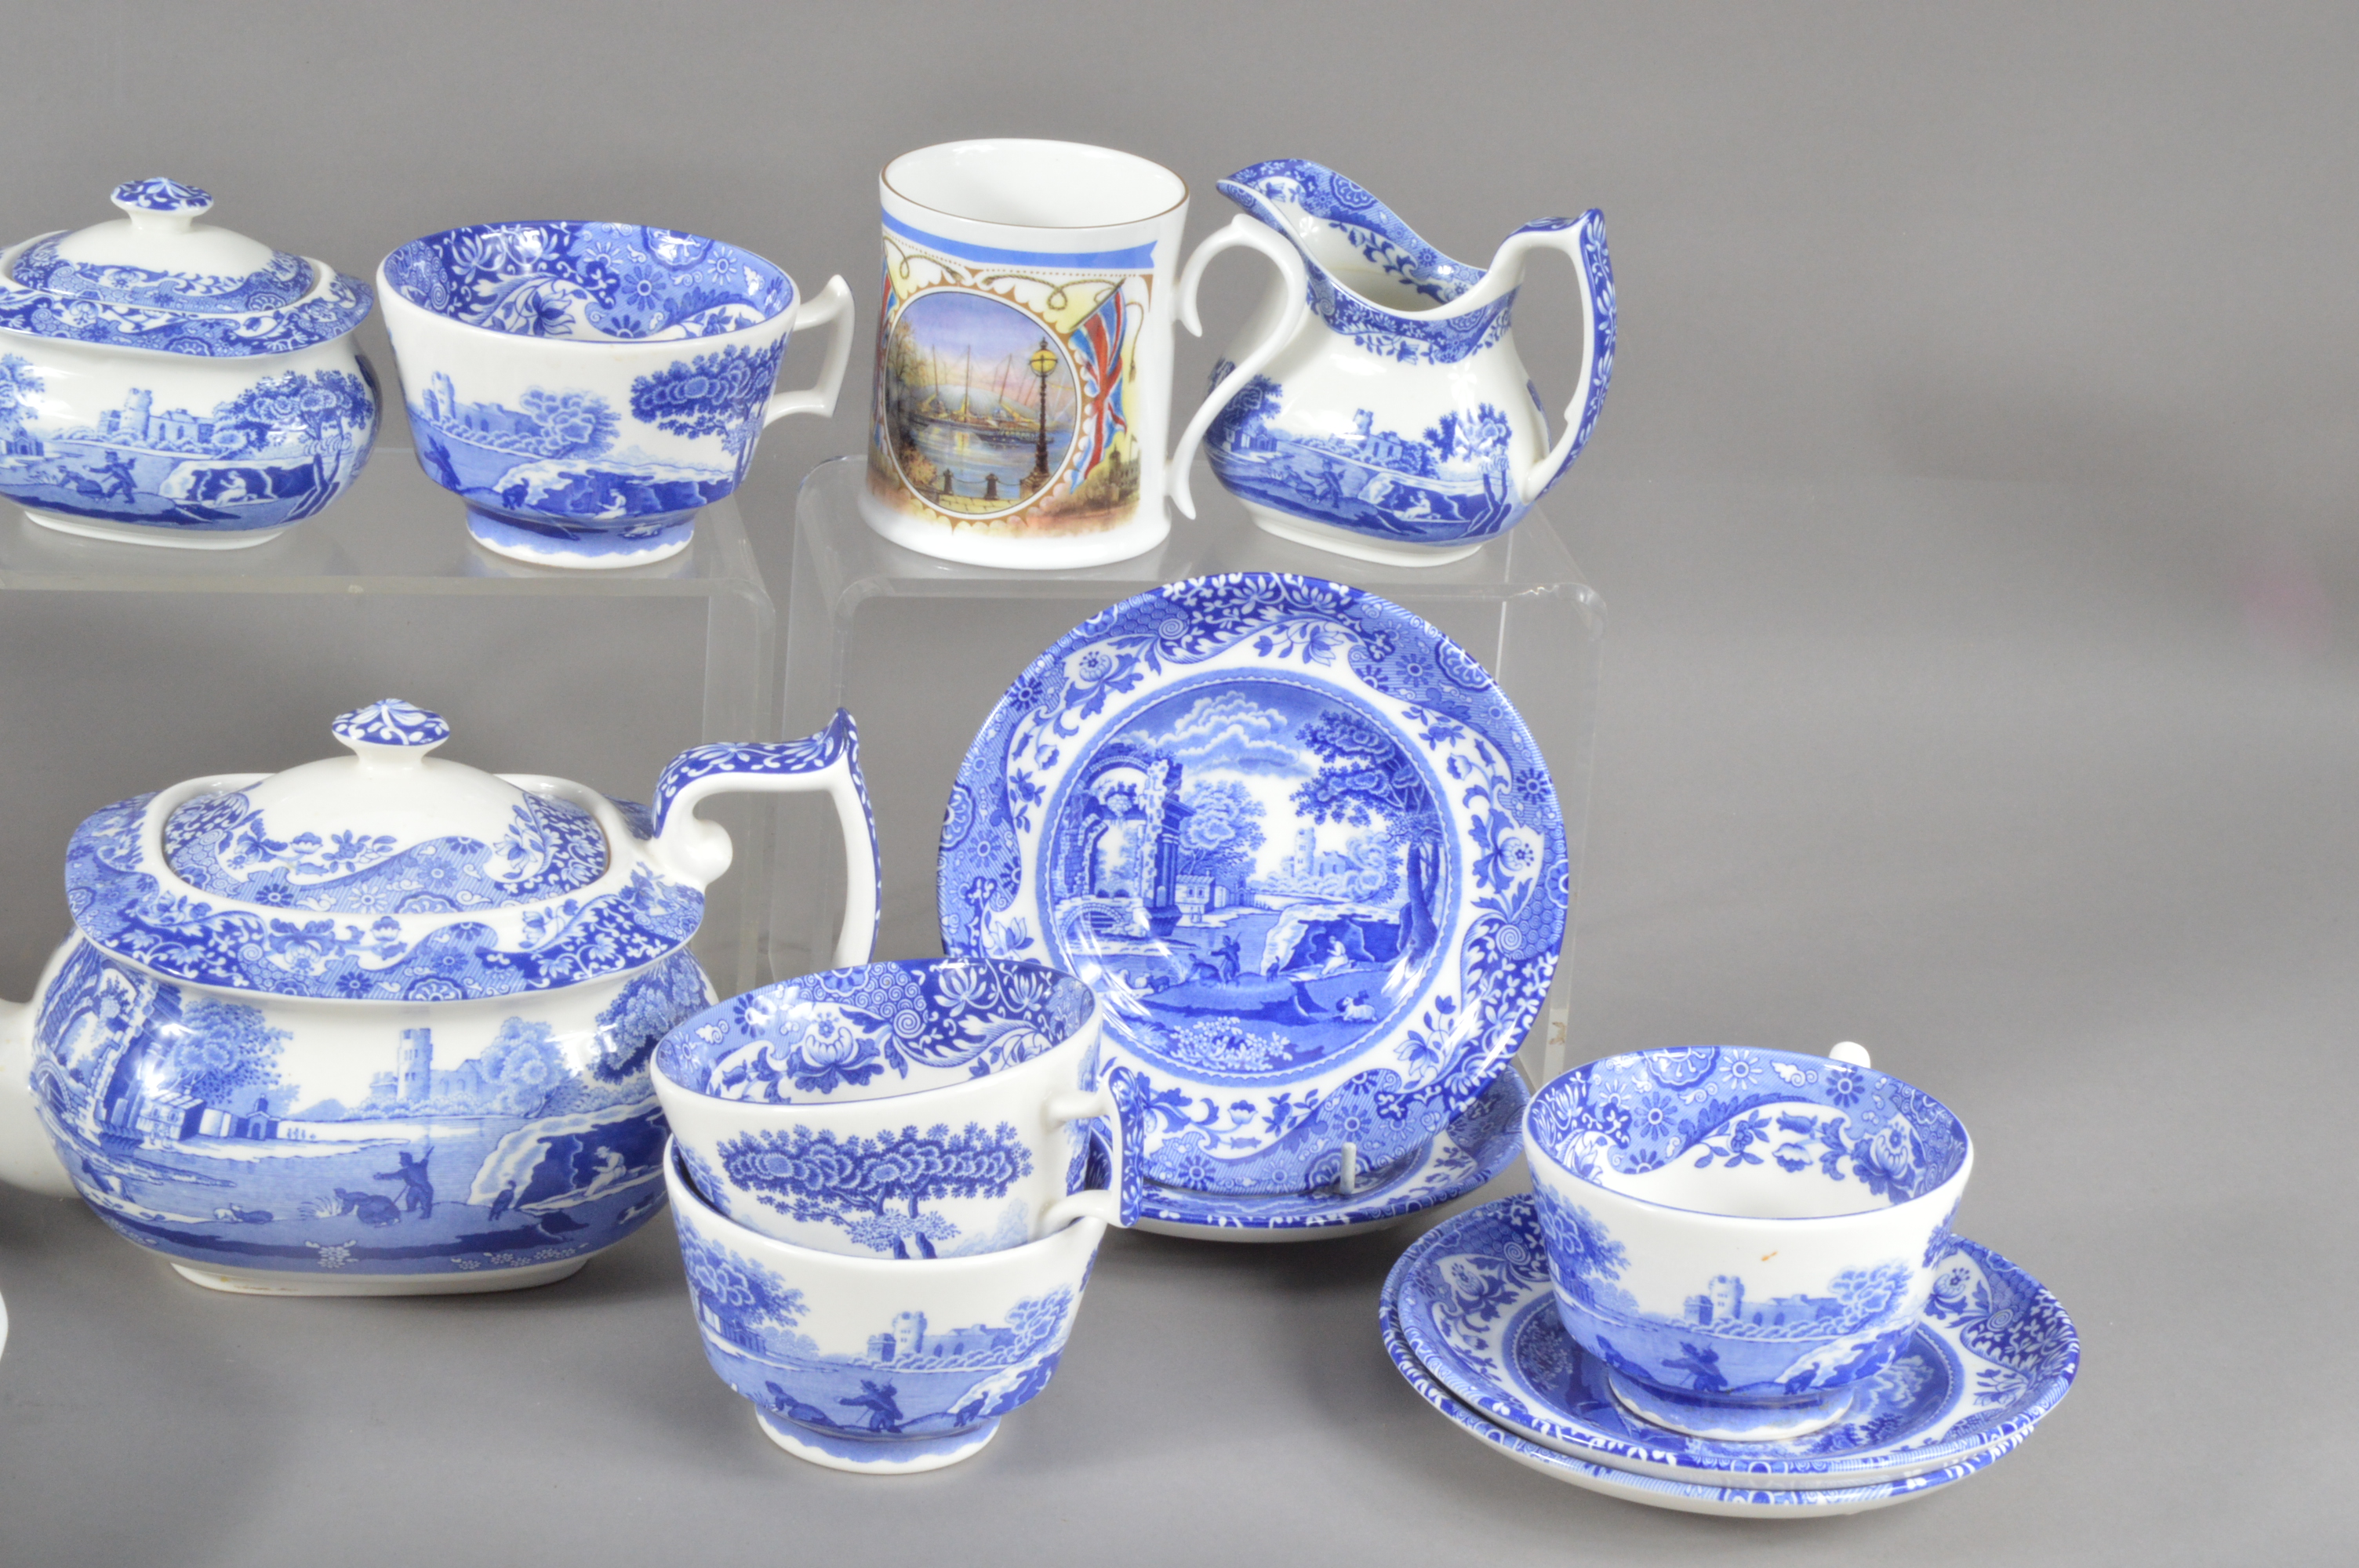 A collection of modern Spode Italian ceramic items, with blue and white transfer design, - Image 4 of 4